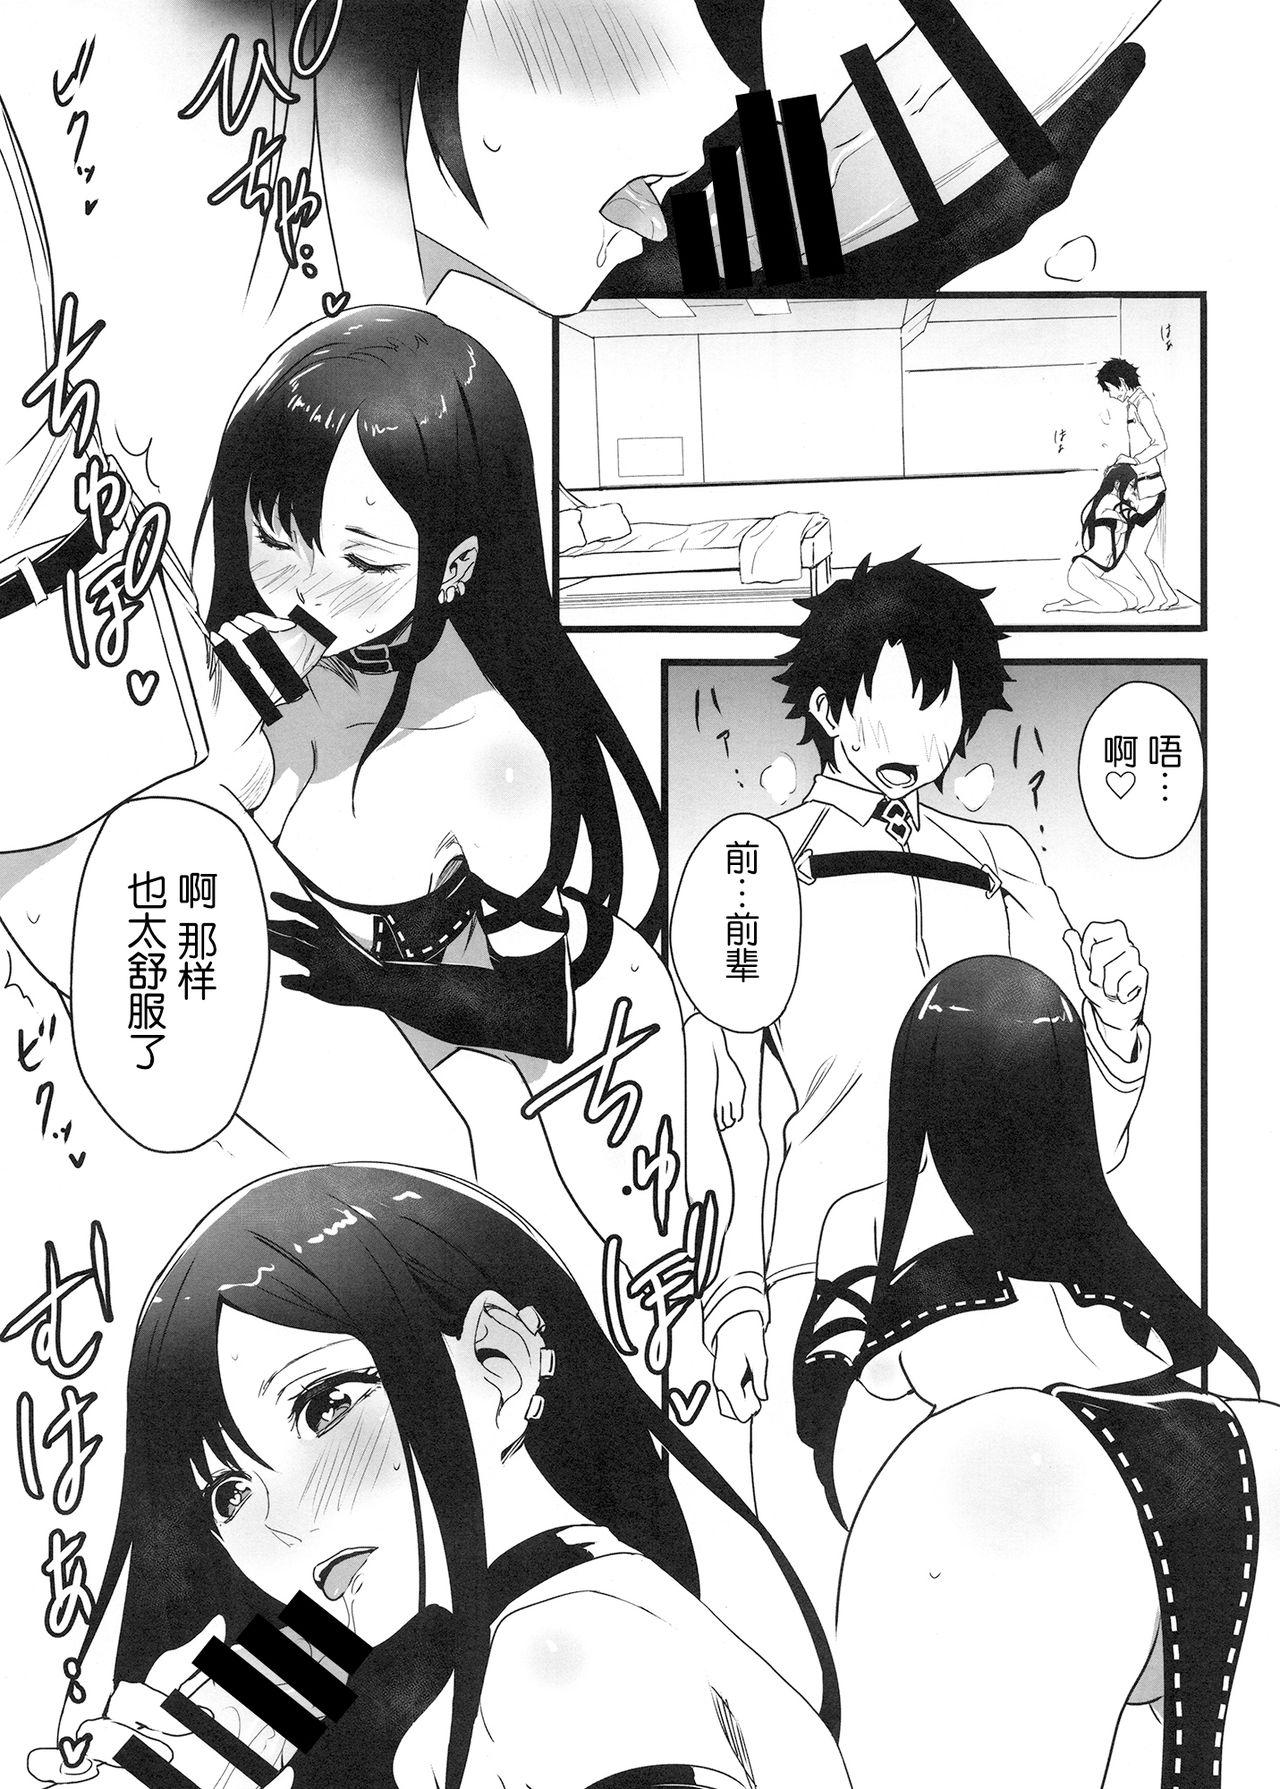 Virginity Gubijin-san to Himegoto - Fate grand order Body - Page 4